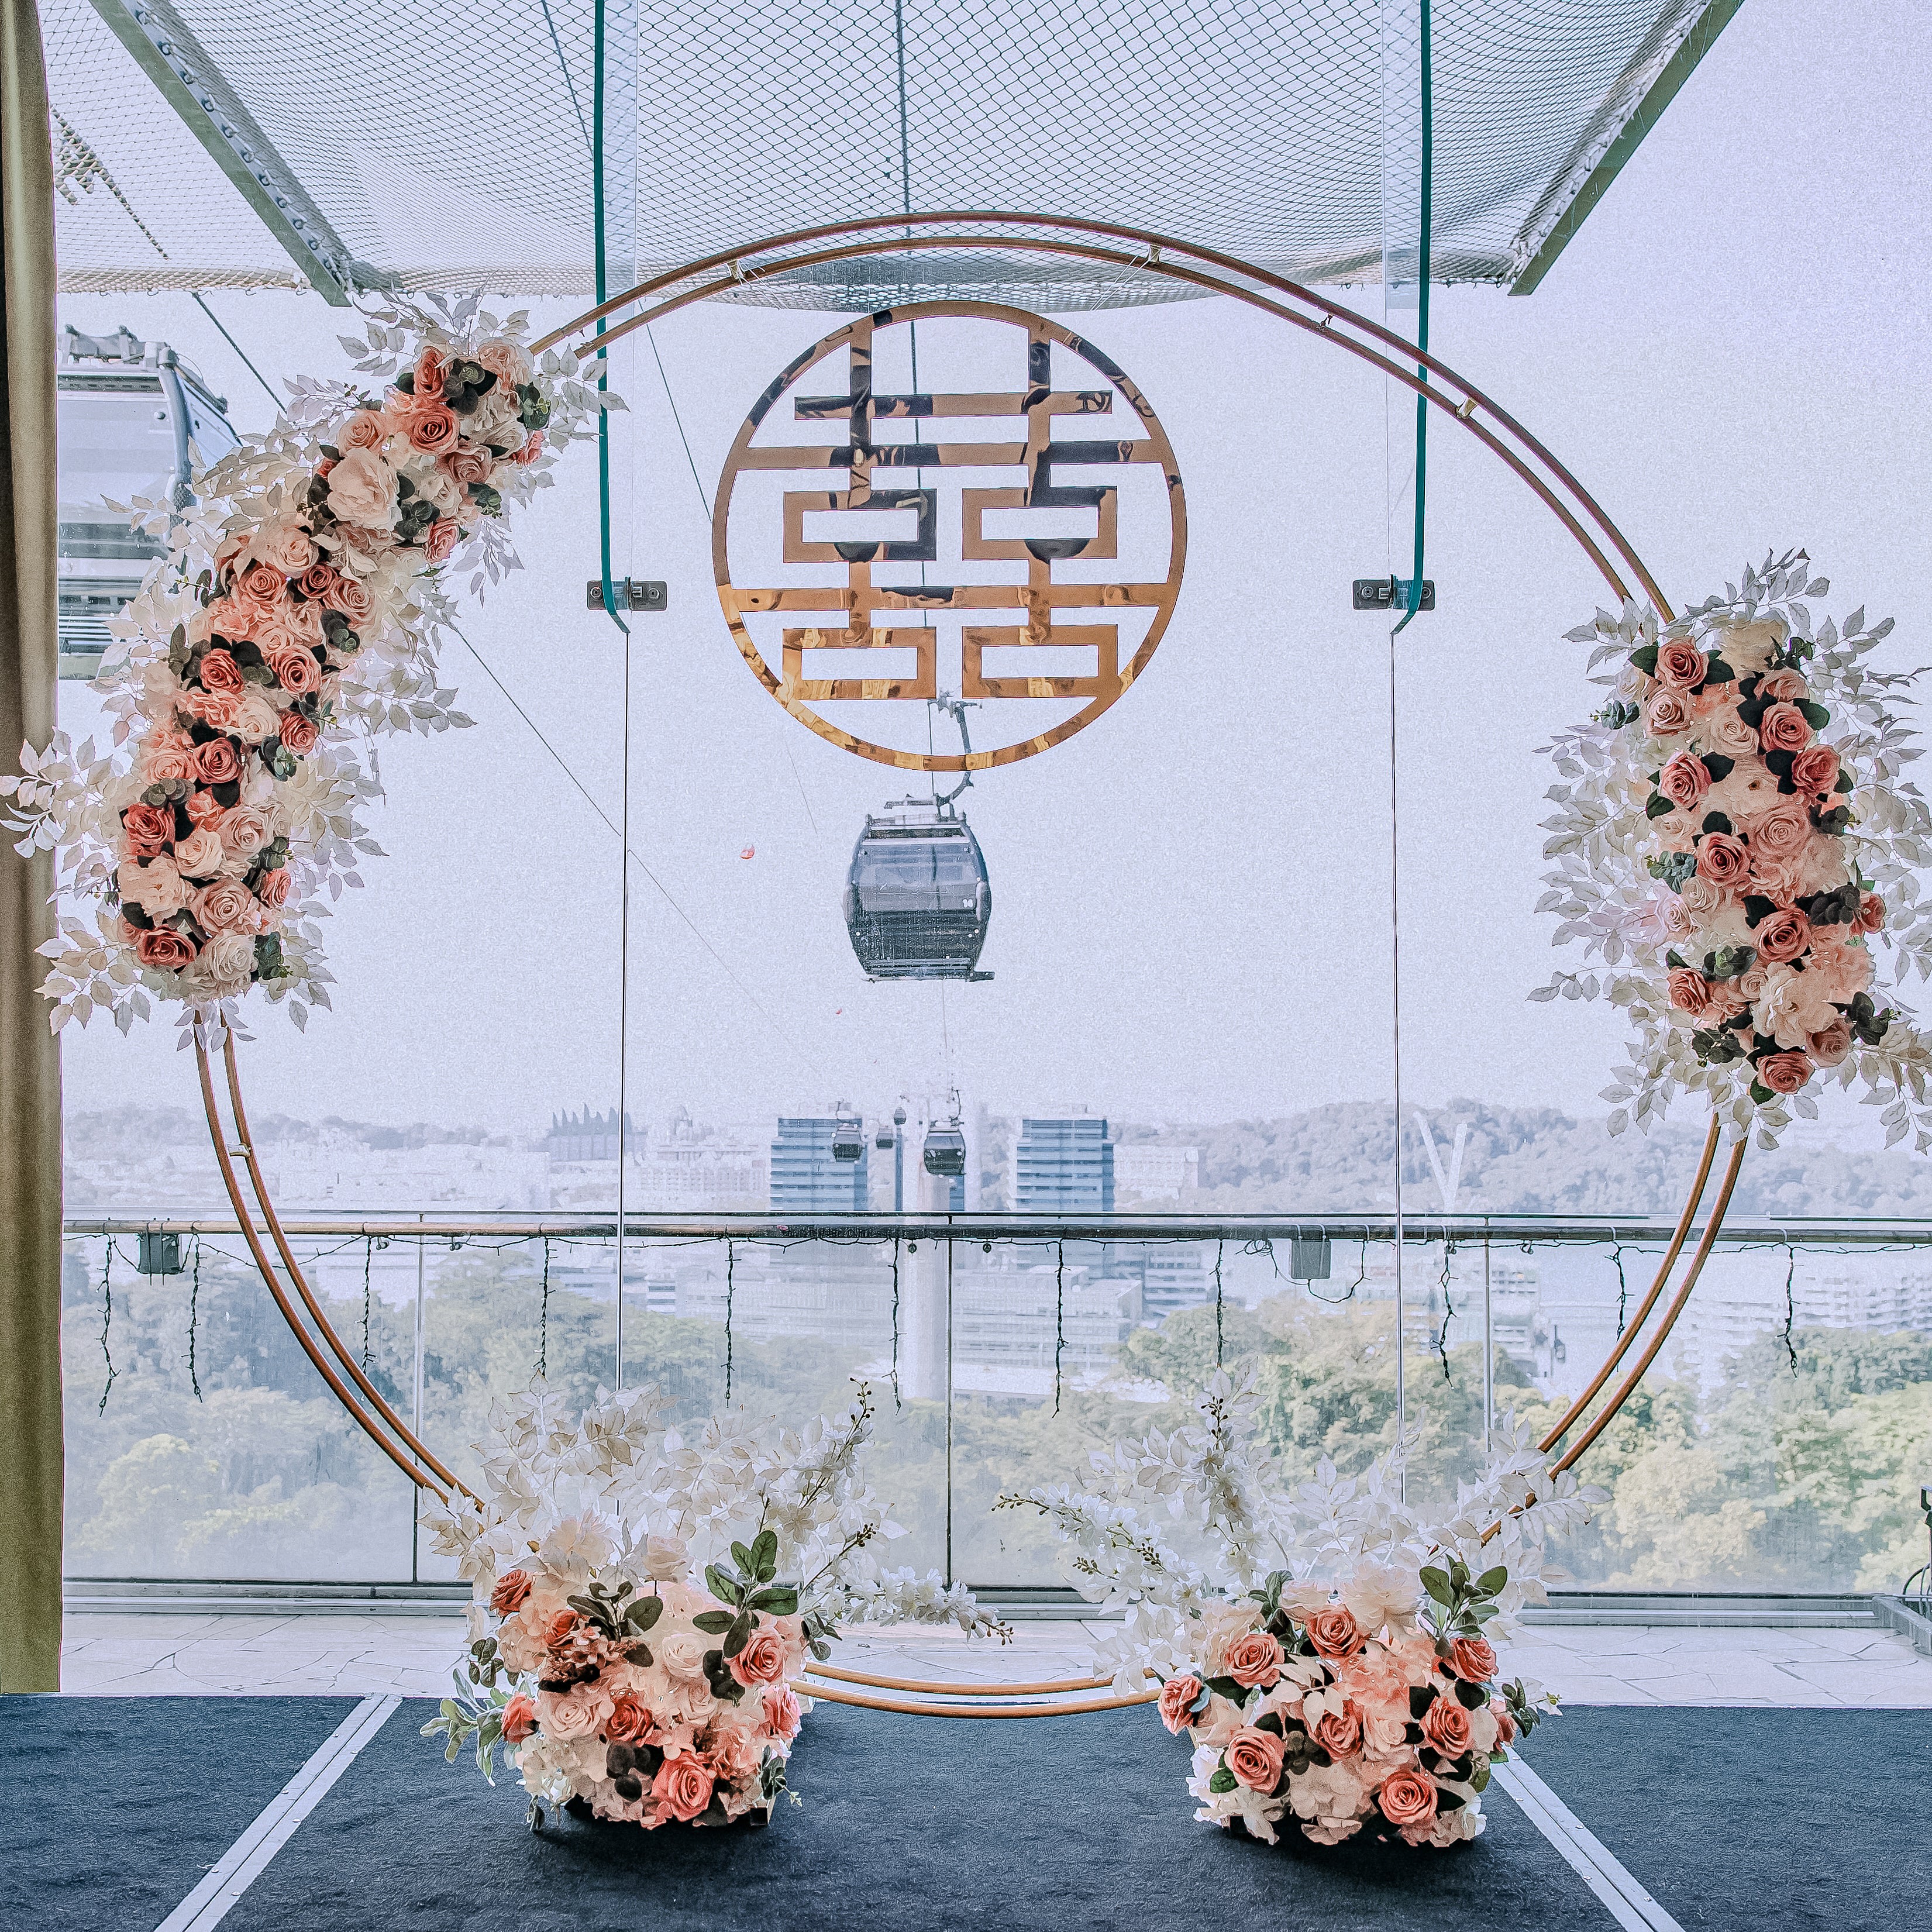 Wedding Stage Decor in Singapore - White & Pink Theme Floral Arch suitable for Indoor/Outdoor (Venue: Mount Faber Peak)